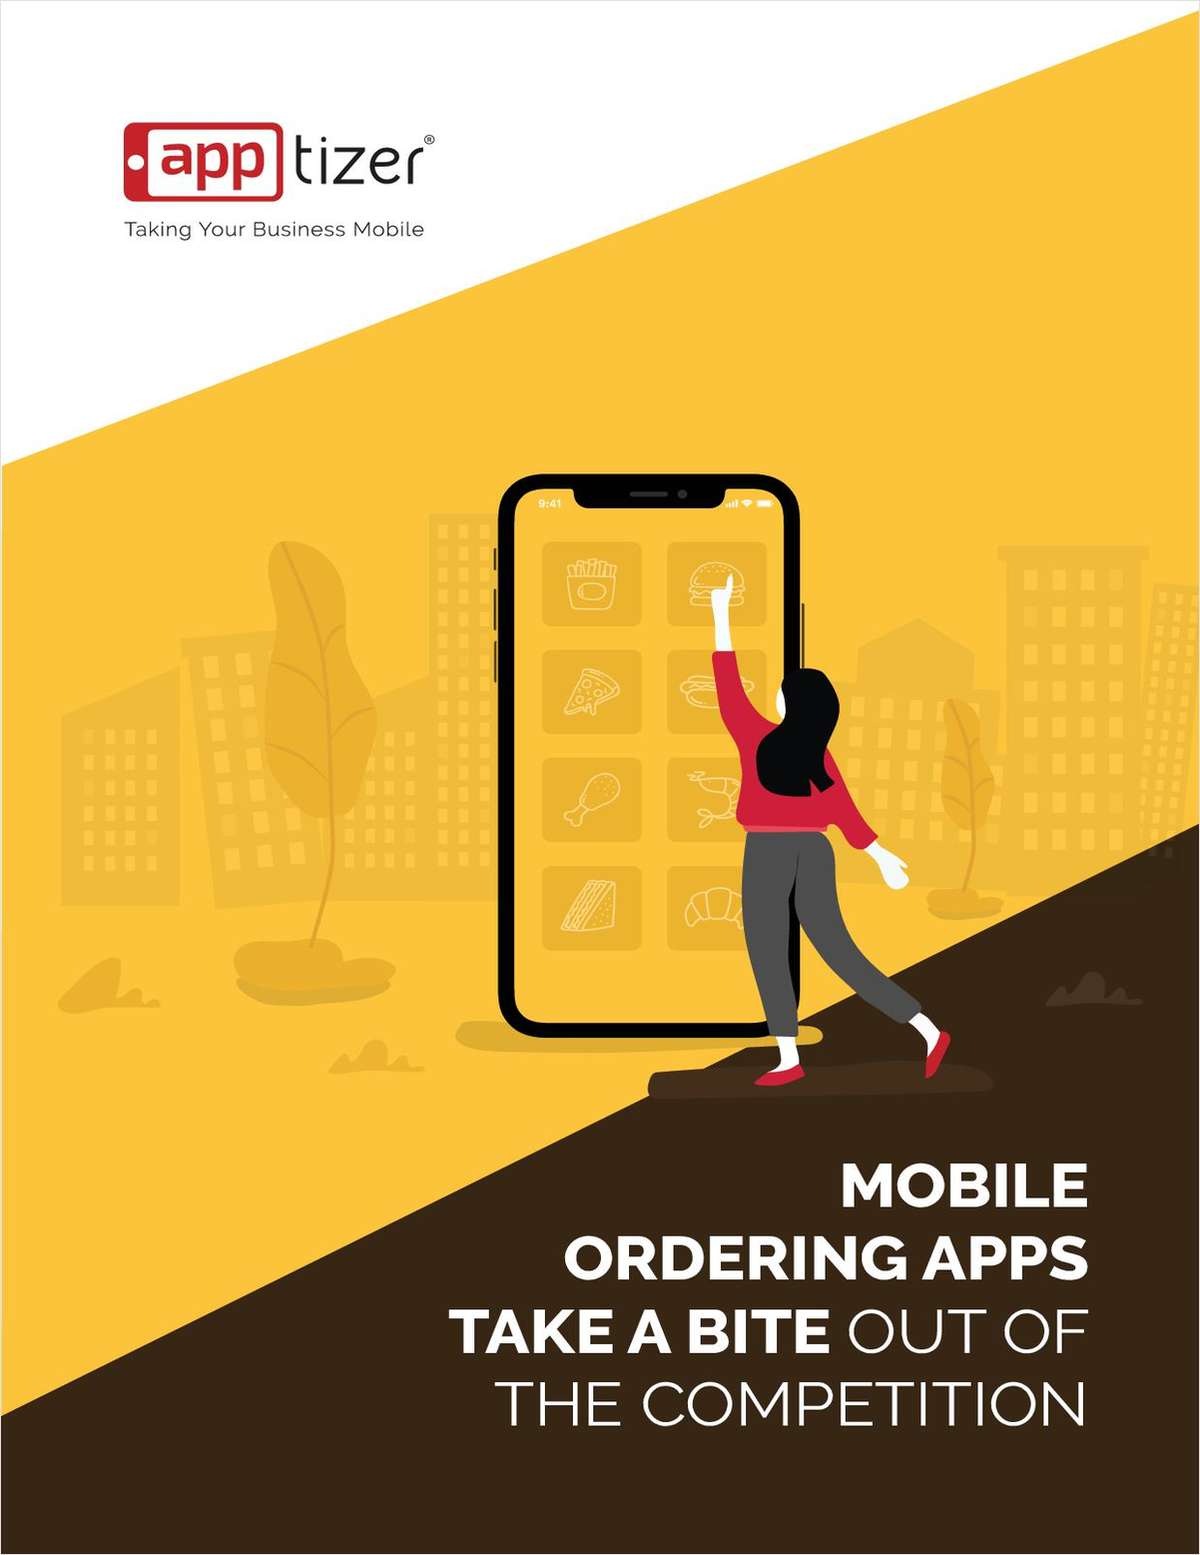 Mobile Ordering Apps Take a Bite Out of the Competition